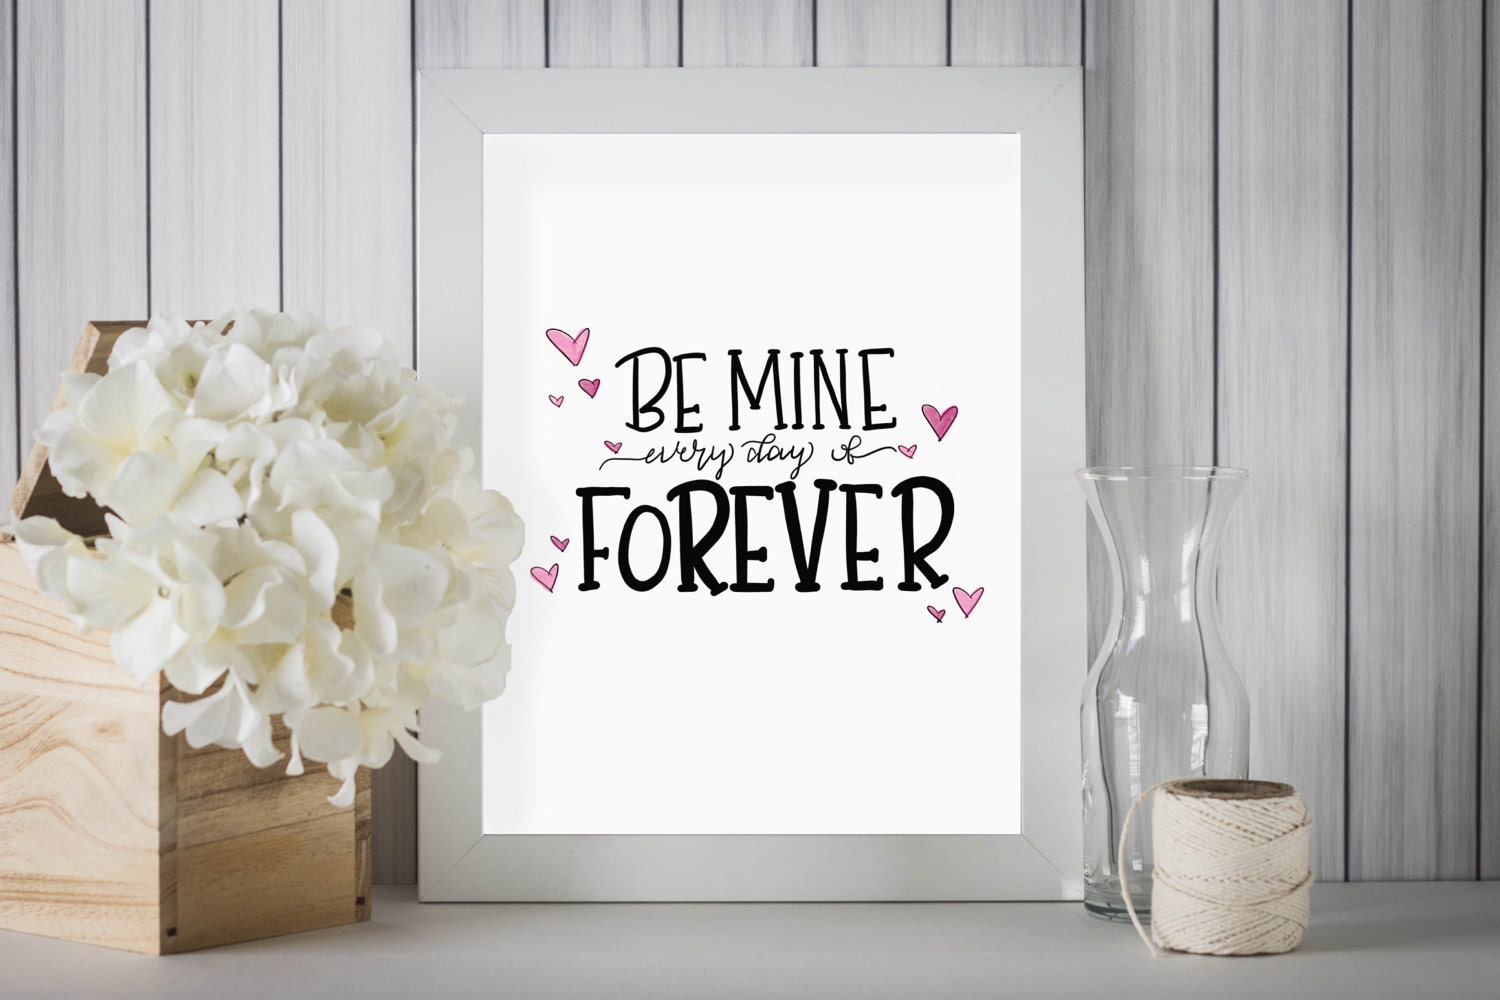 Be Mine Hand Lettered Art Print | Love Quote | Romantic Boyfriend Gift | Husband Gift | Love Wall Decor | Anniversary Gift for Her or Him